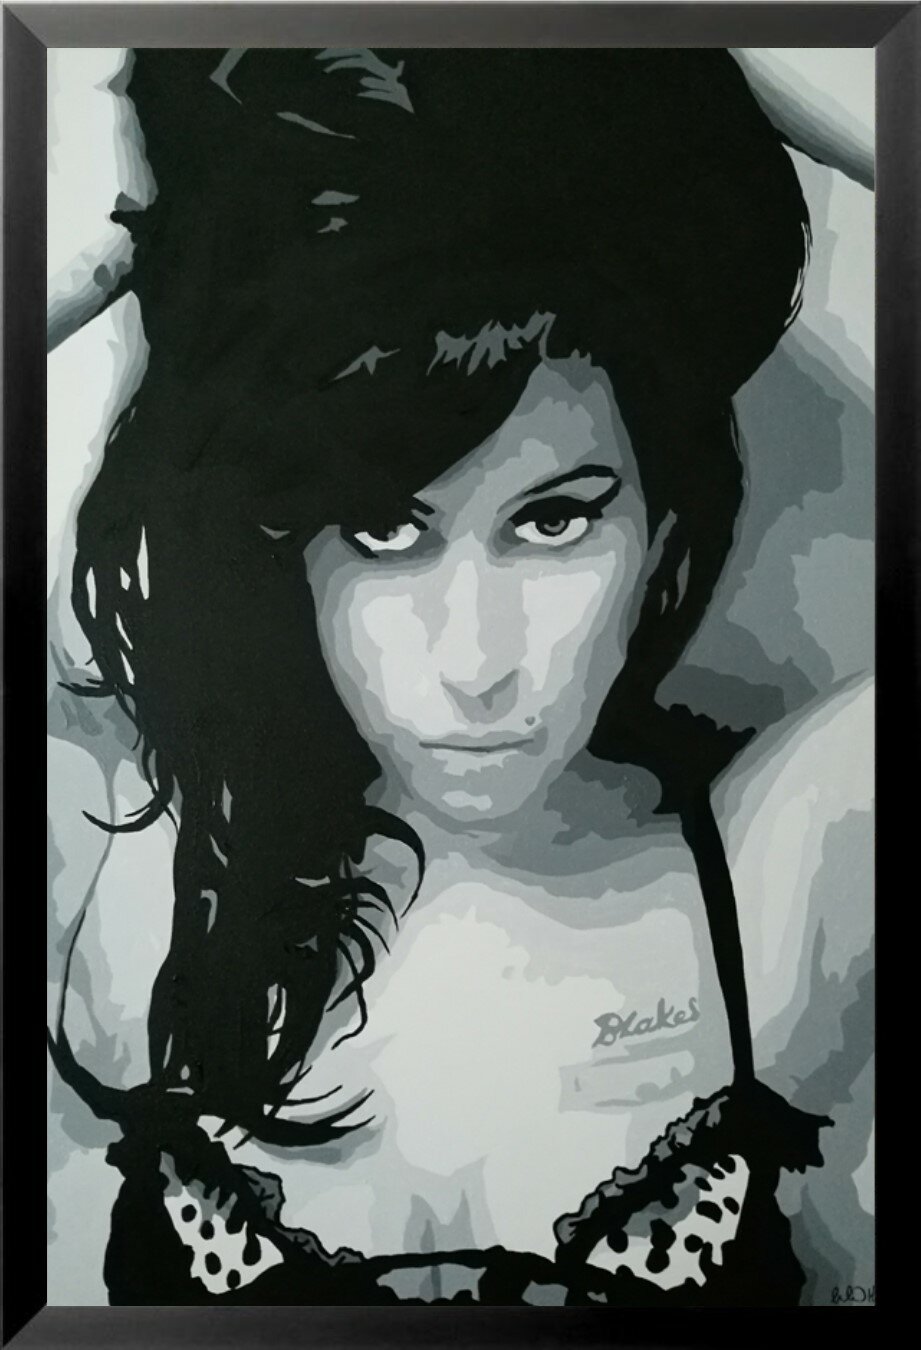 Amy Winehouse Life is short  Black/white Photo Print On Framed Canvas Wall Art 